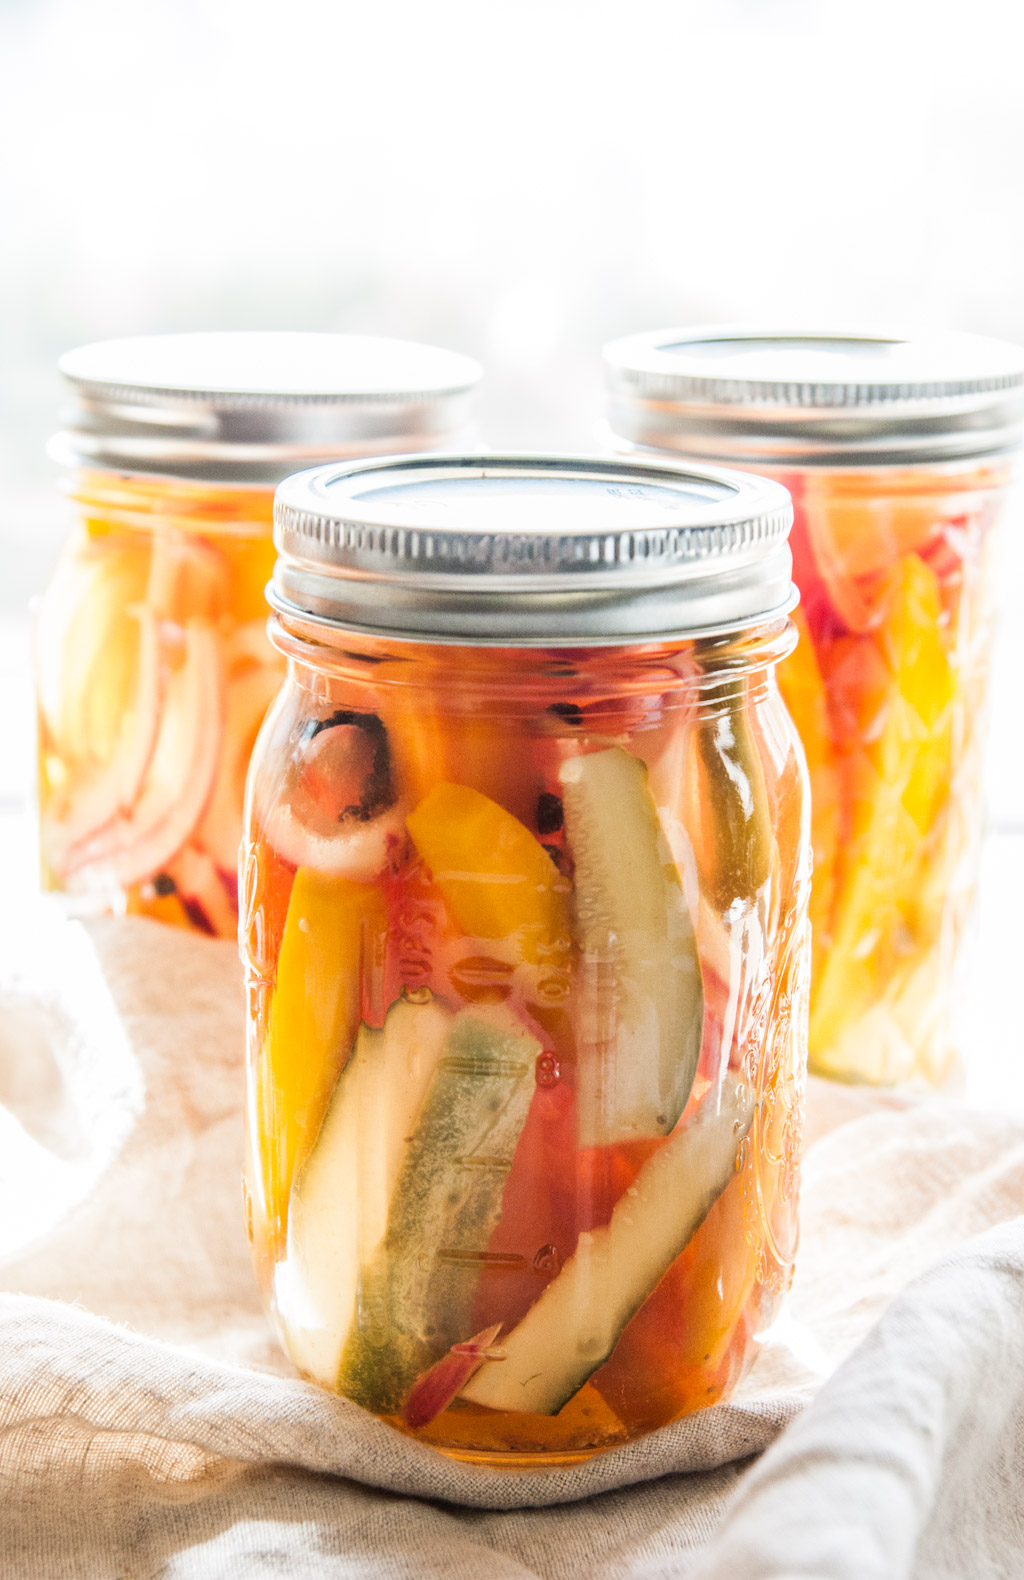 Pickled Vegetables Wallpapers High Quality | Download Free